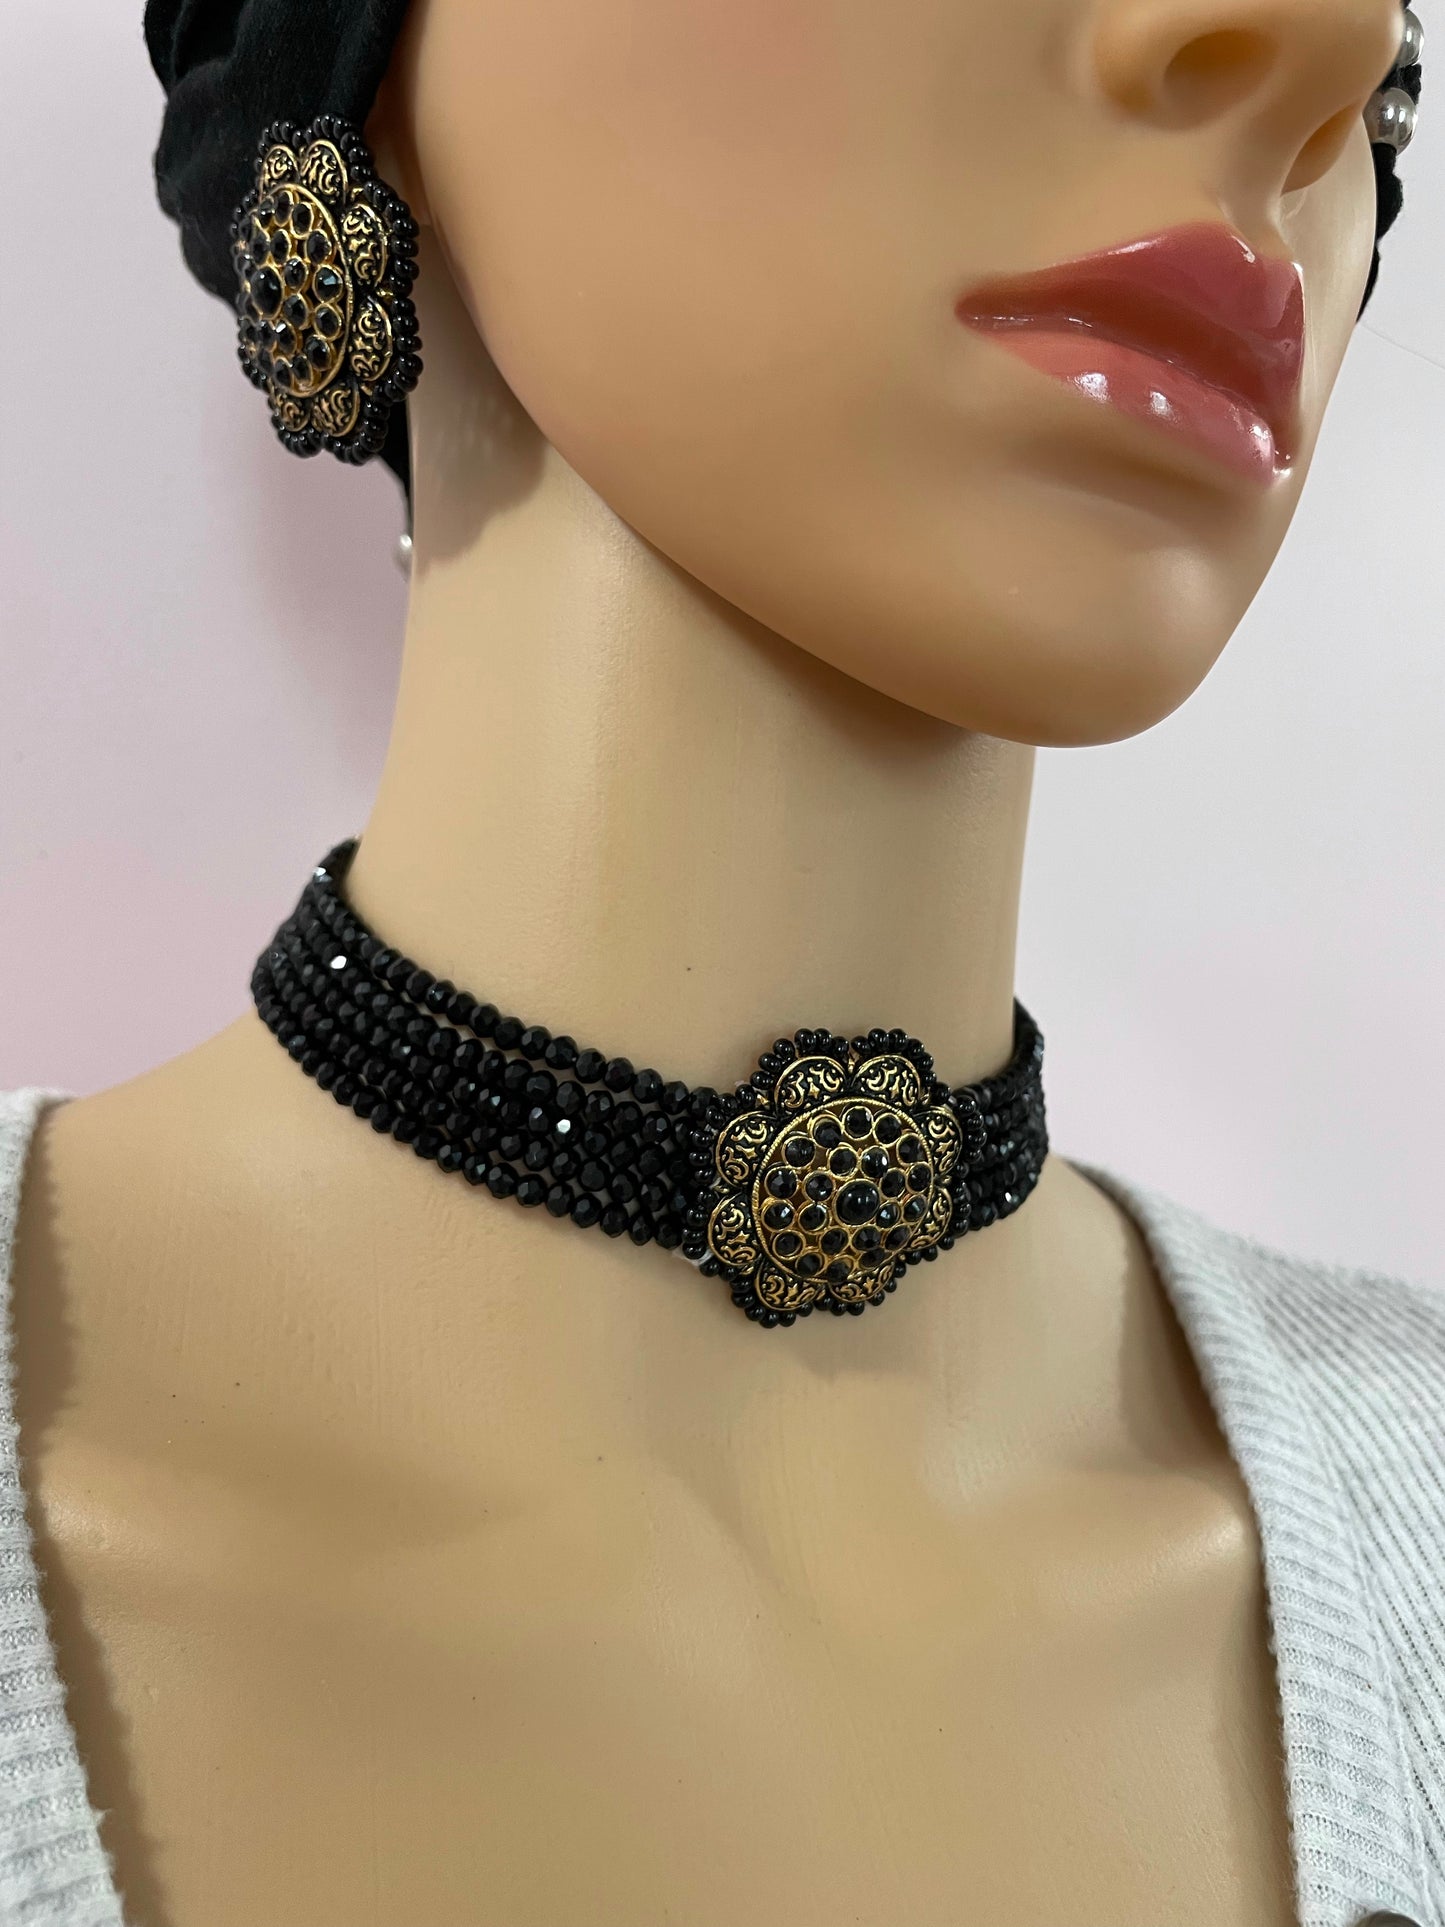 Necklace earrings set black choker handcrafted with adjustable back